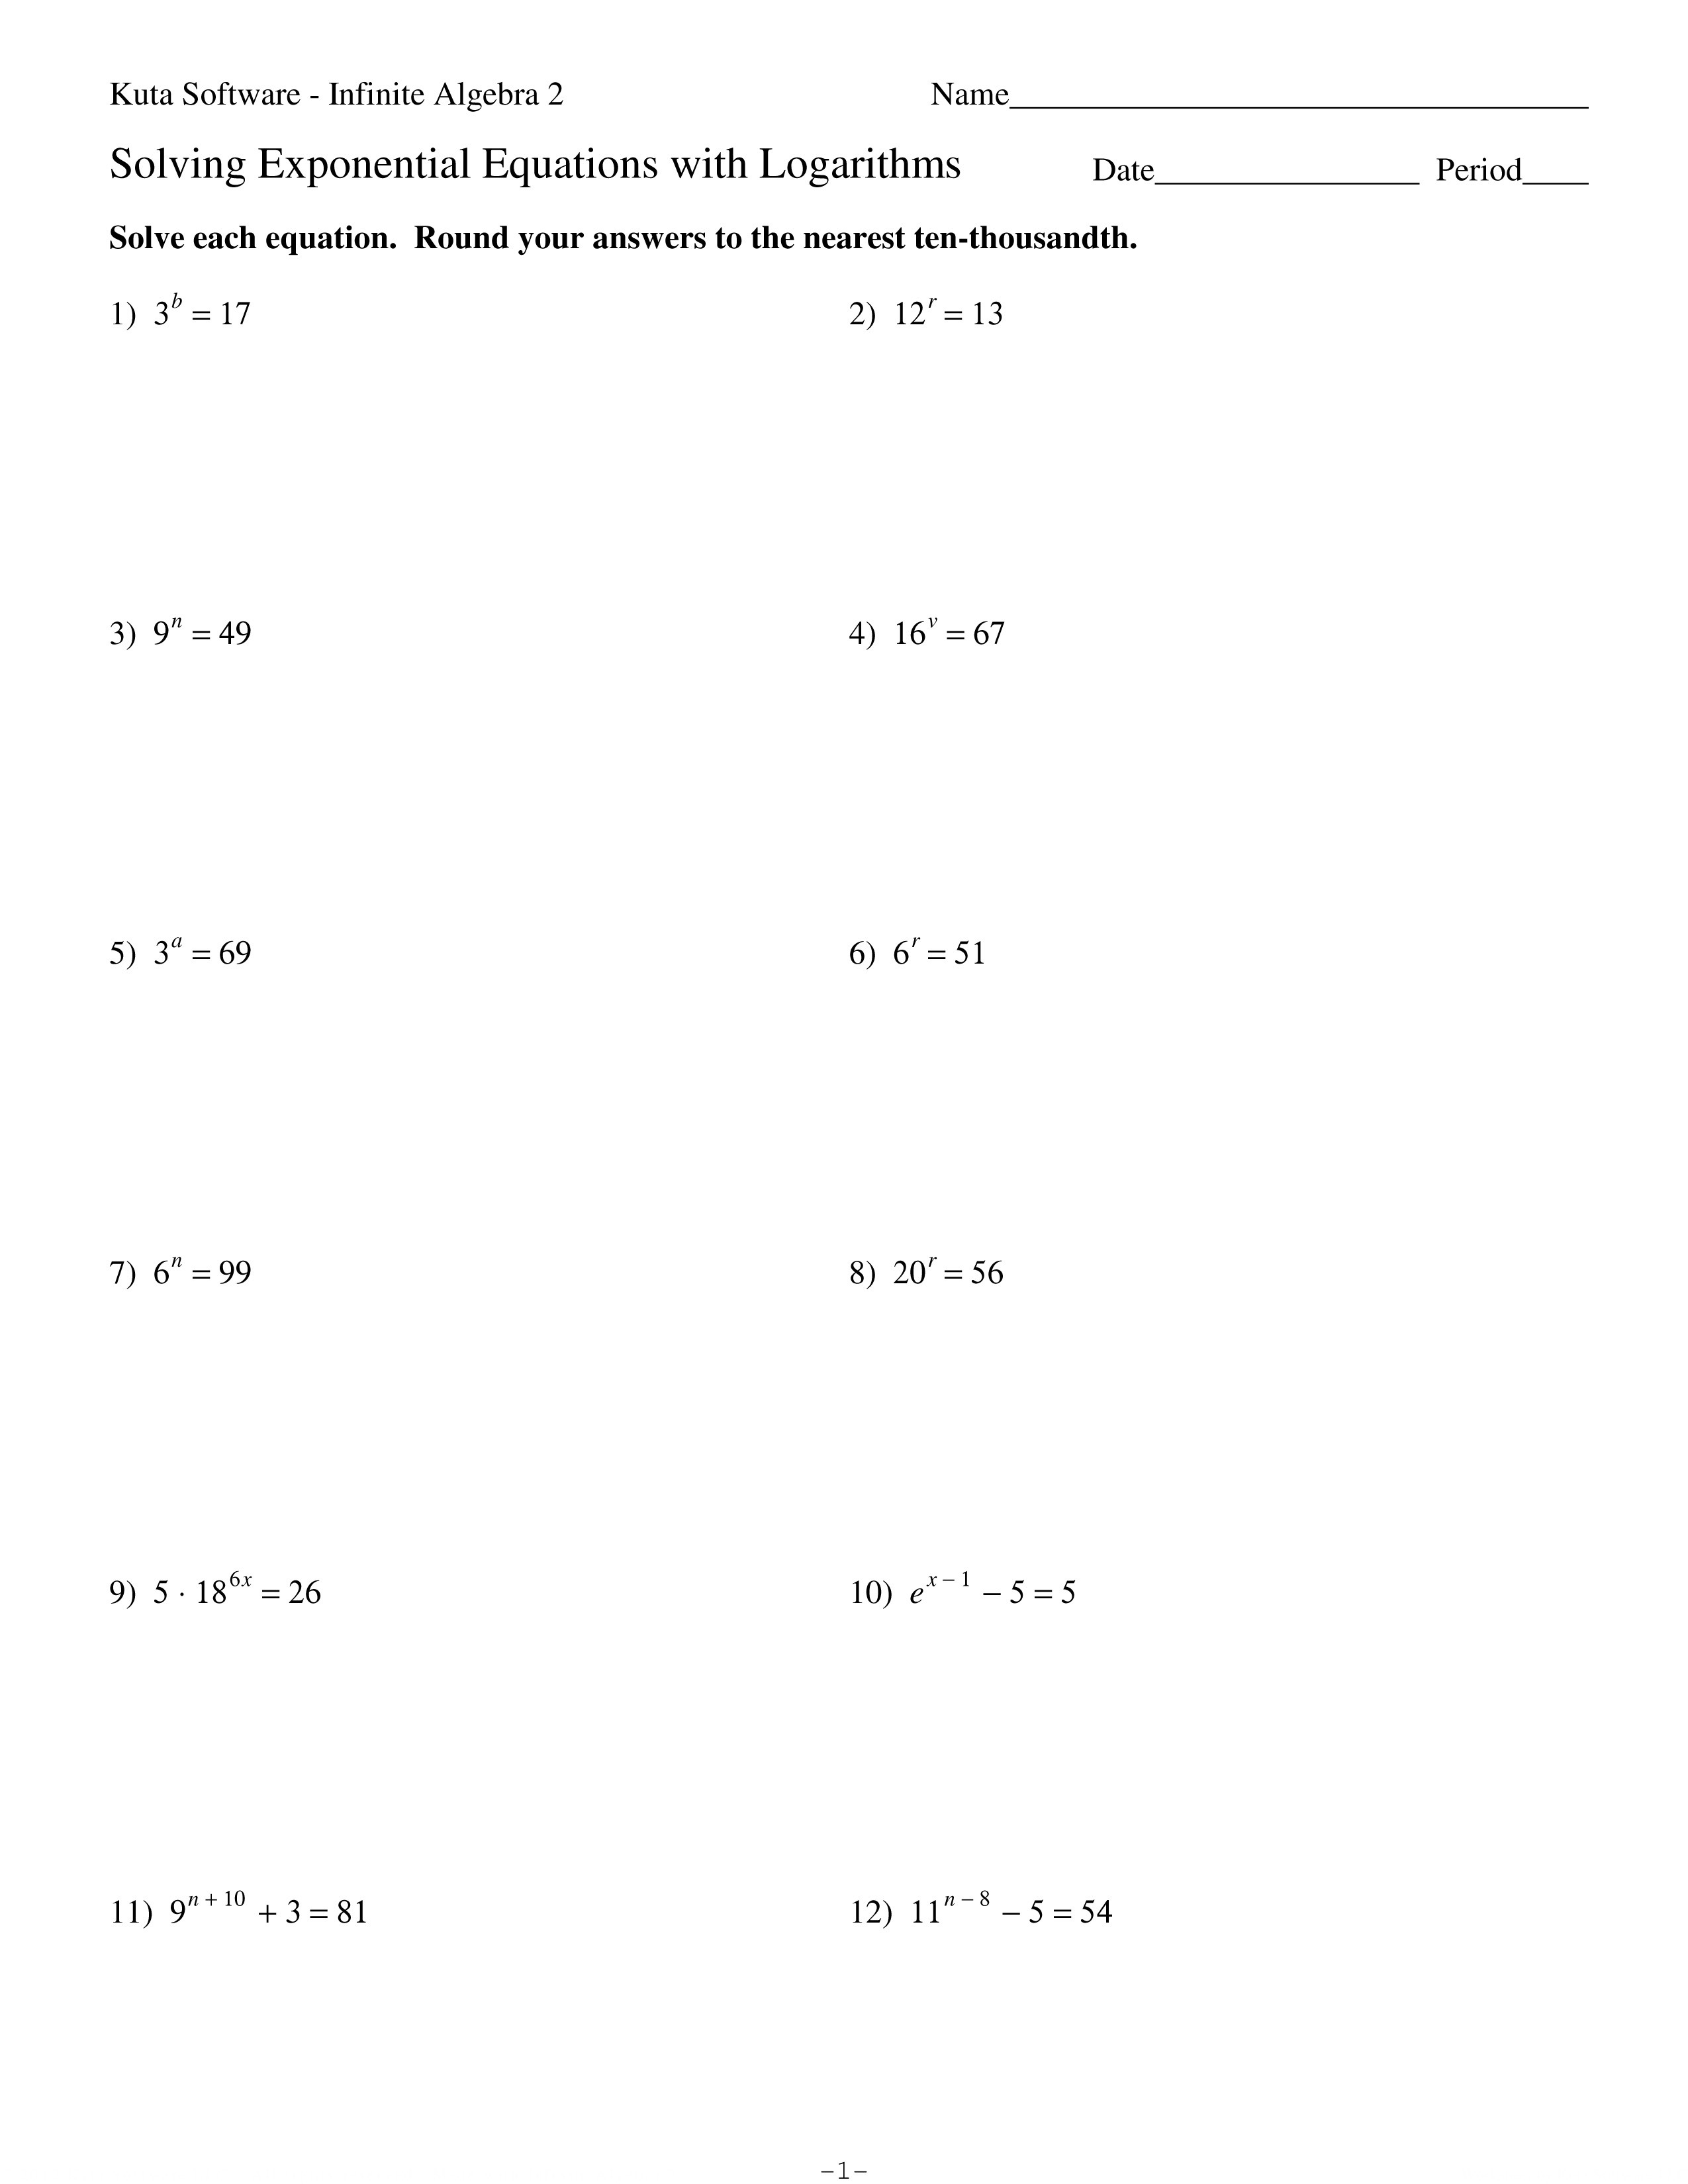 solving-exponential-equations-with-logarithms-worksheet-answers-db-excel